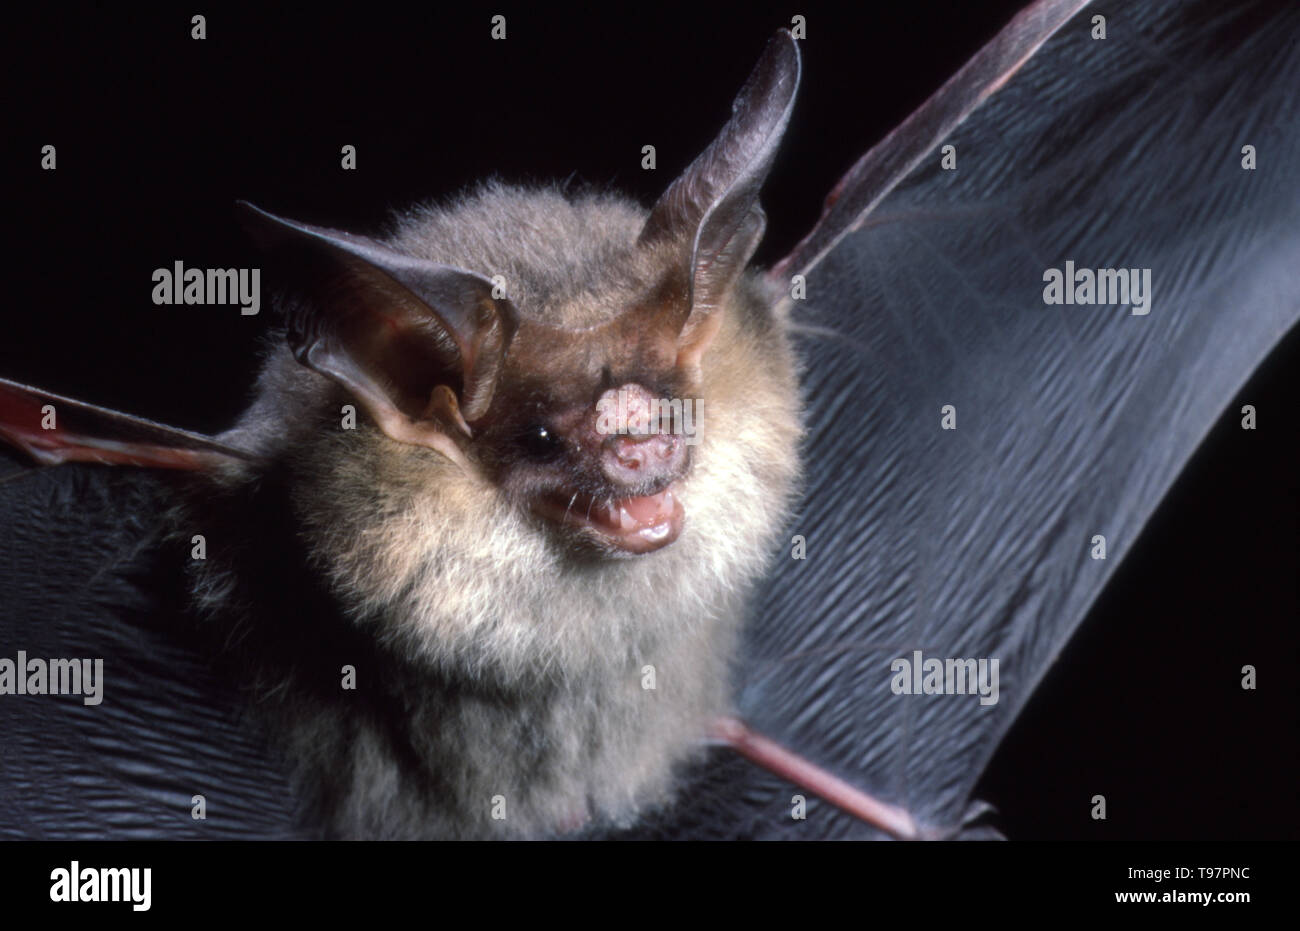 Gould's long-eared bat, species Nyctophilus gouldi, is a microbat found in southern regions of Australia. Stock Photo